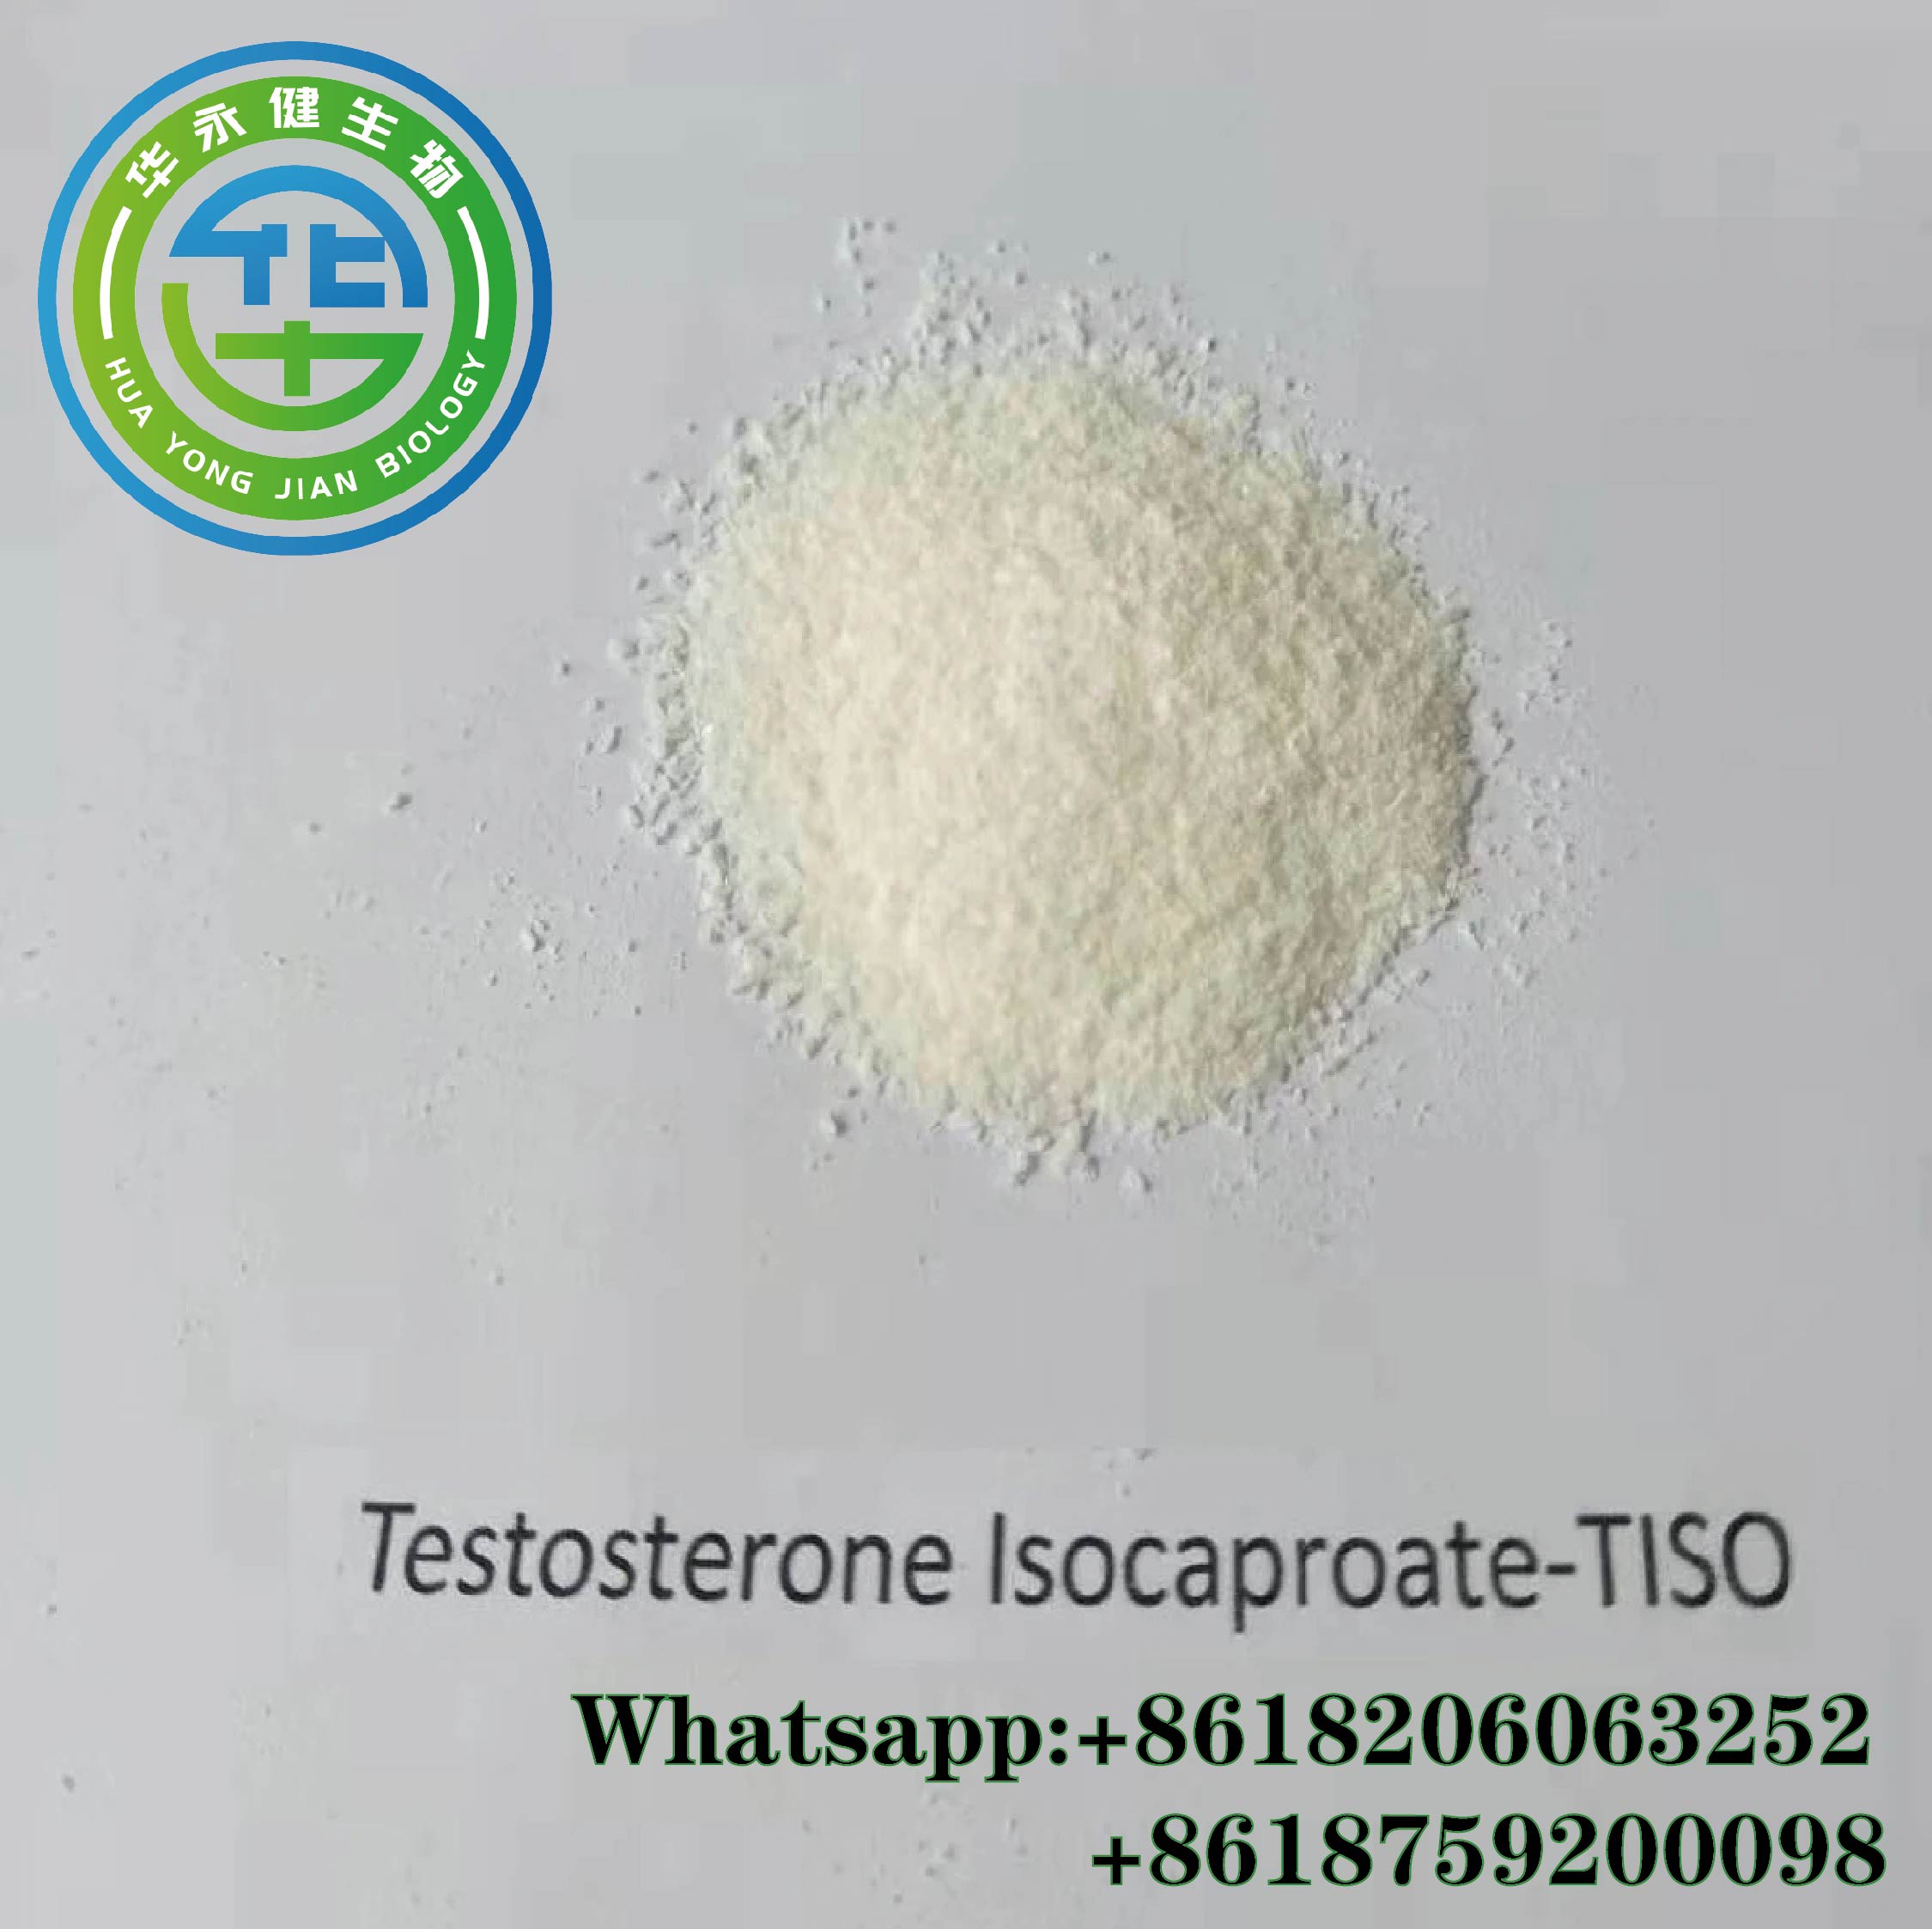 98% Purity Testosterone Isocaproate/Testosterone Iso Steroid Homone powder For Muscle Building And Cutting Cycle